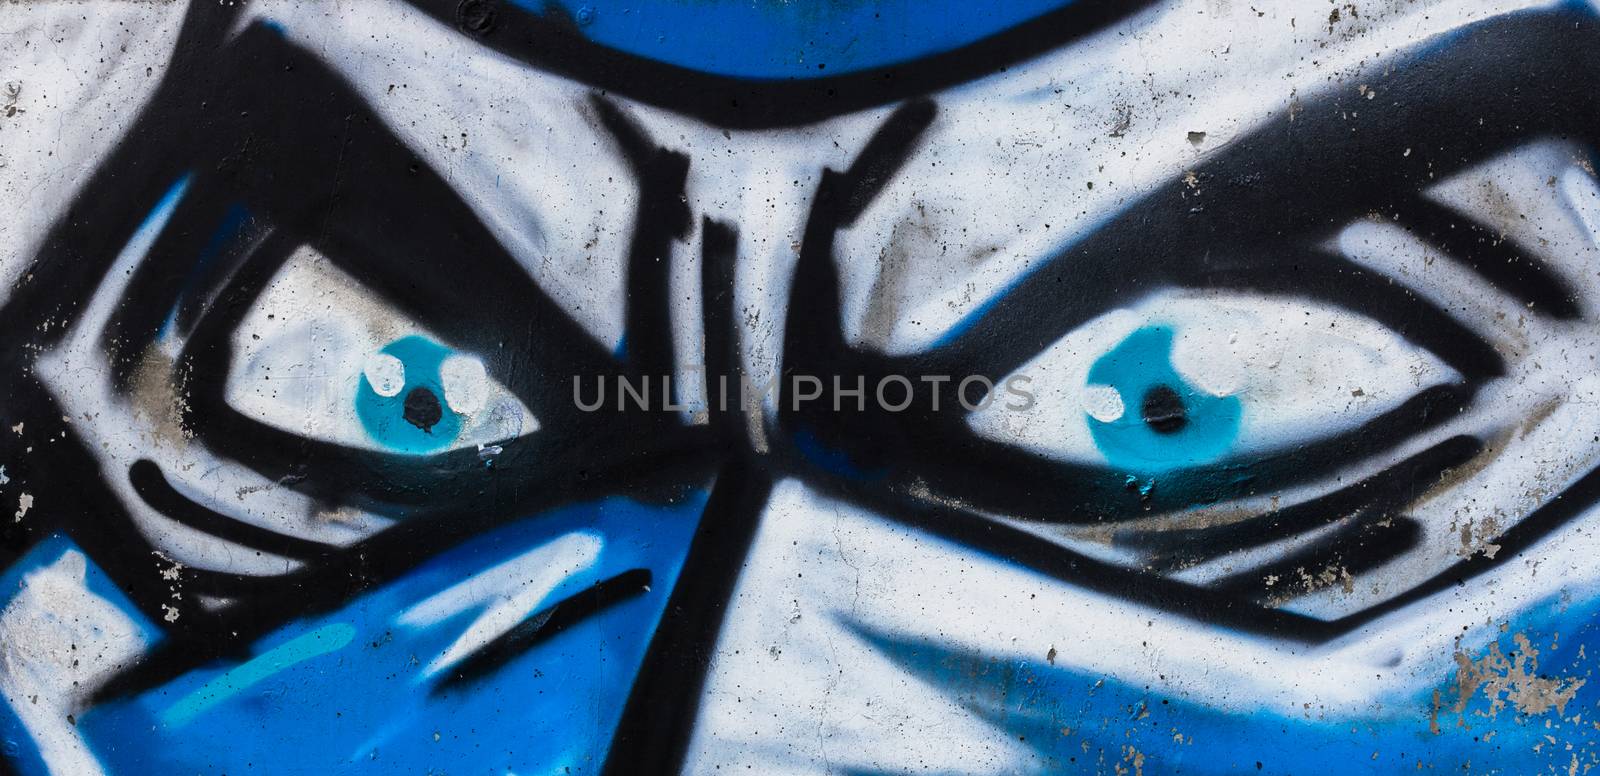 Monster graffiti on the wall by germanopoli